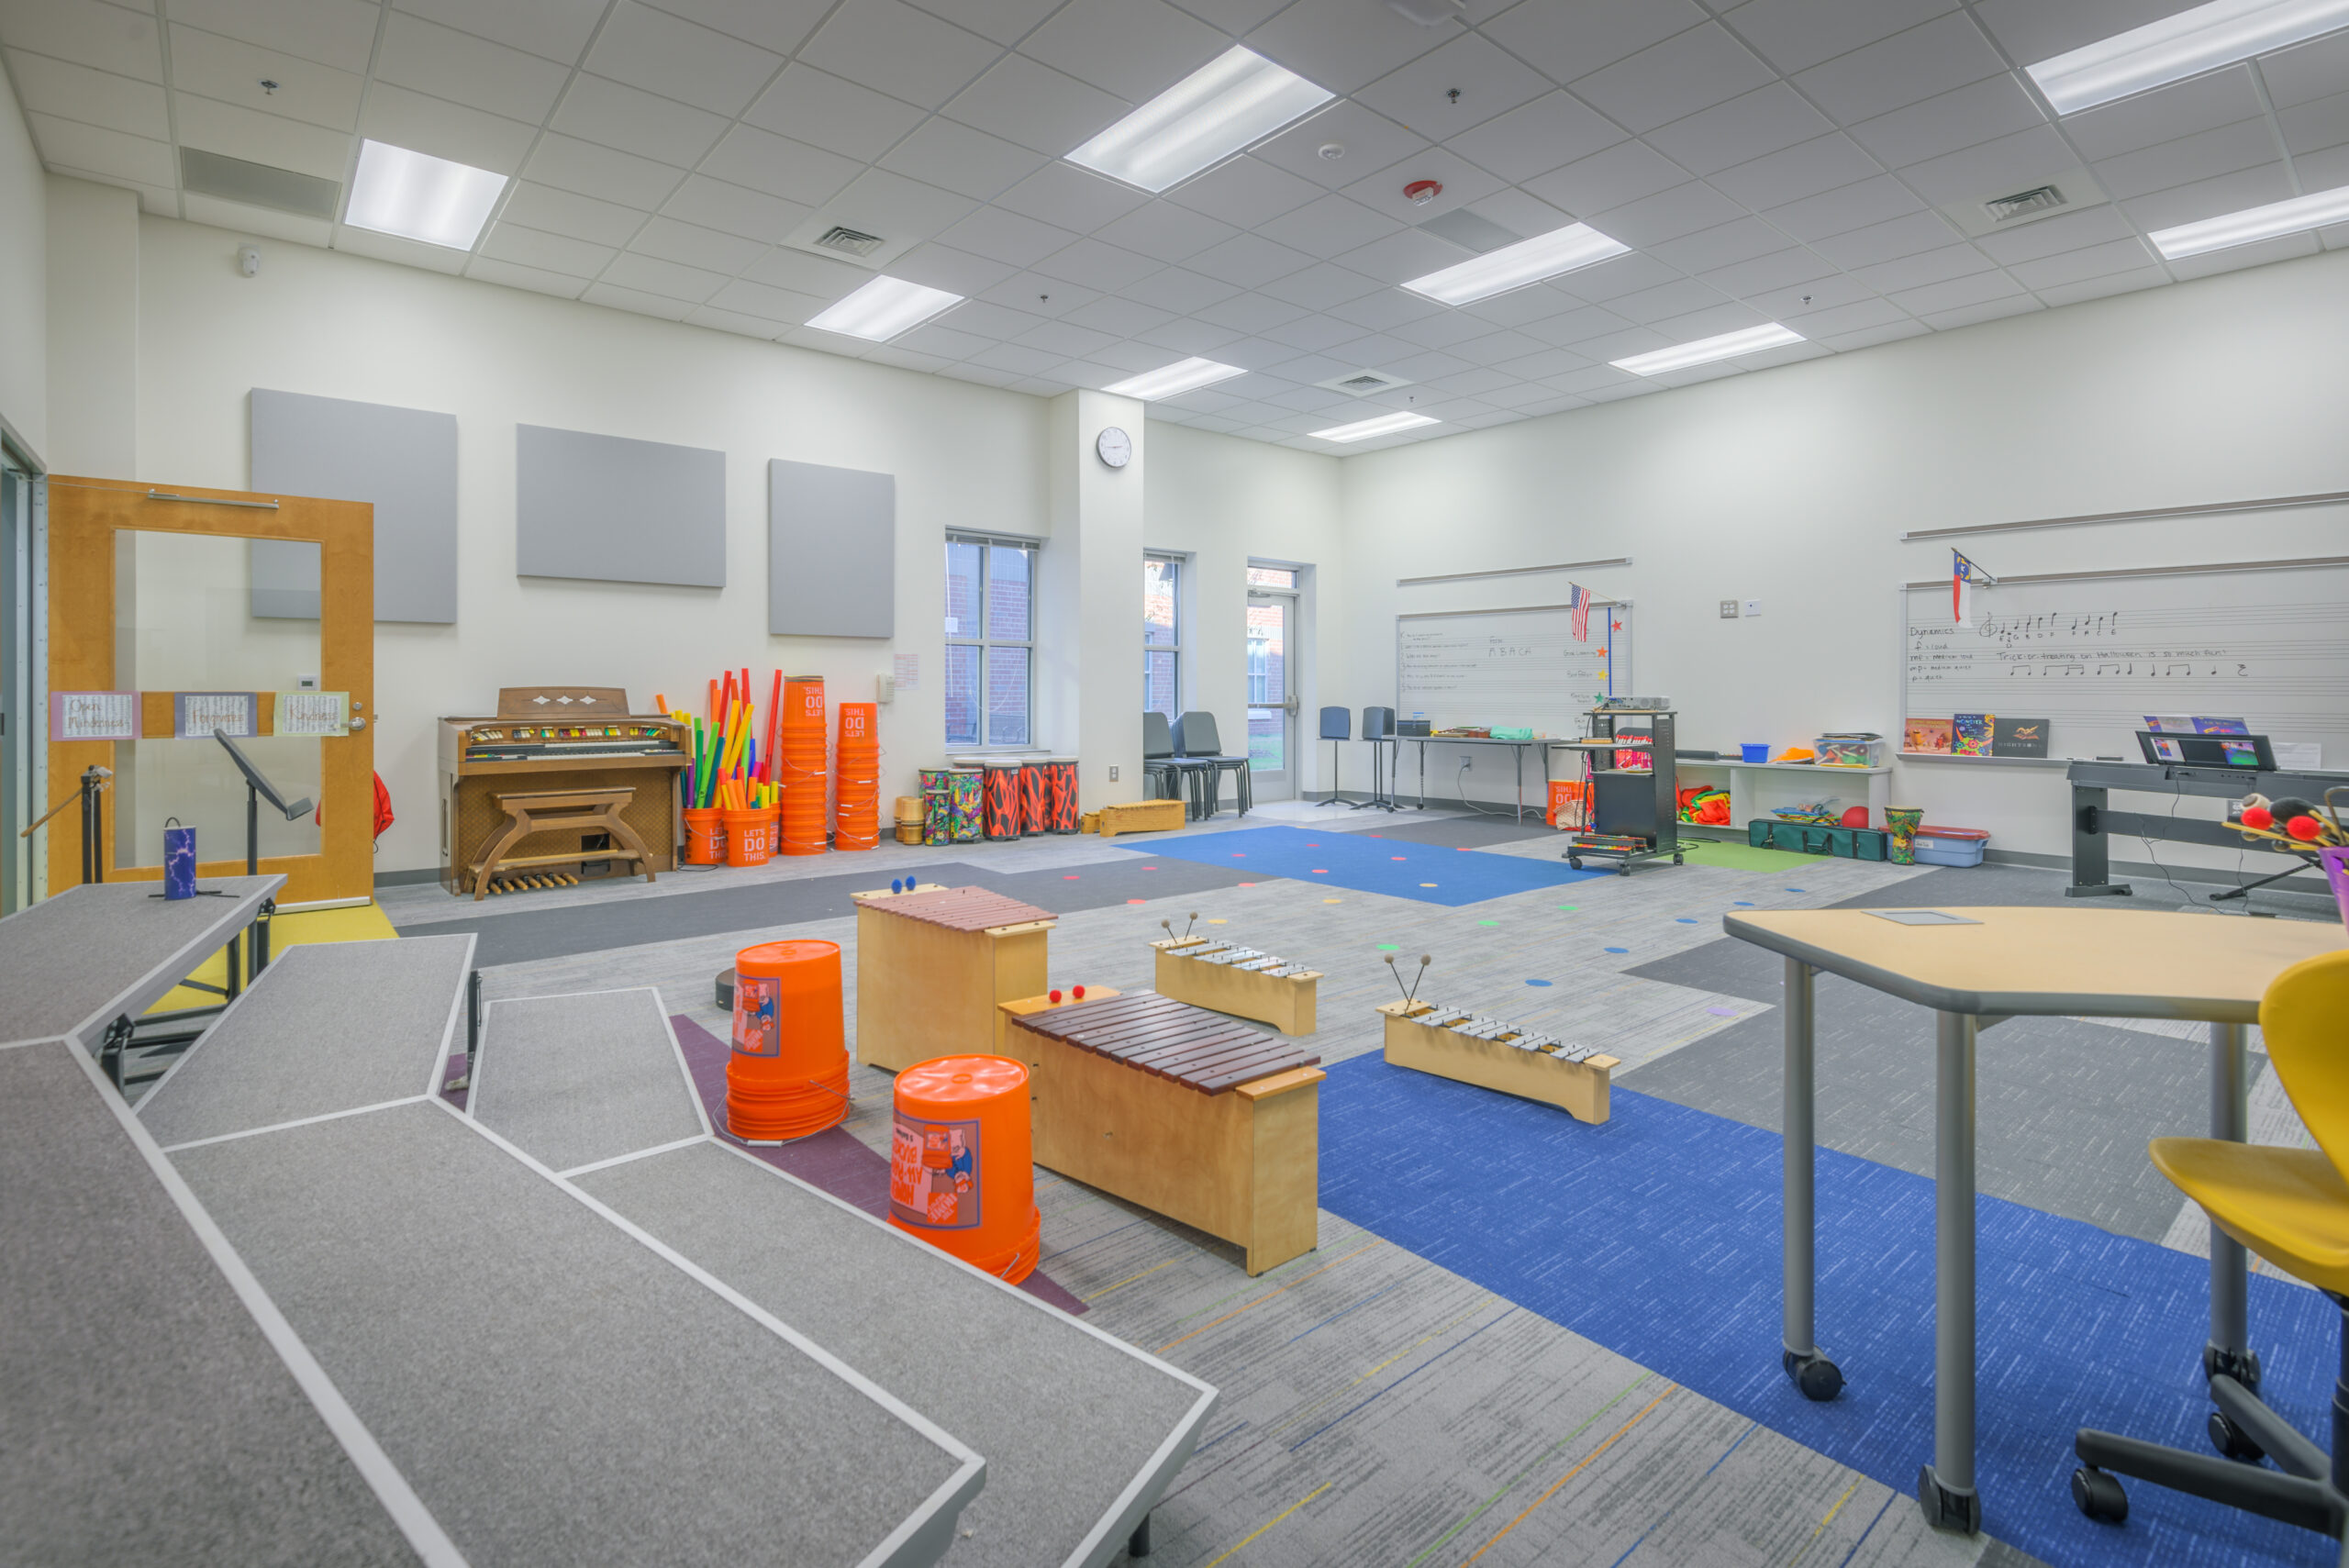 Barton Pond Elementary School Music Room with Risers, Xylophones, and a Piano